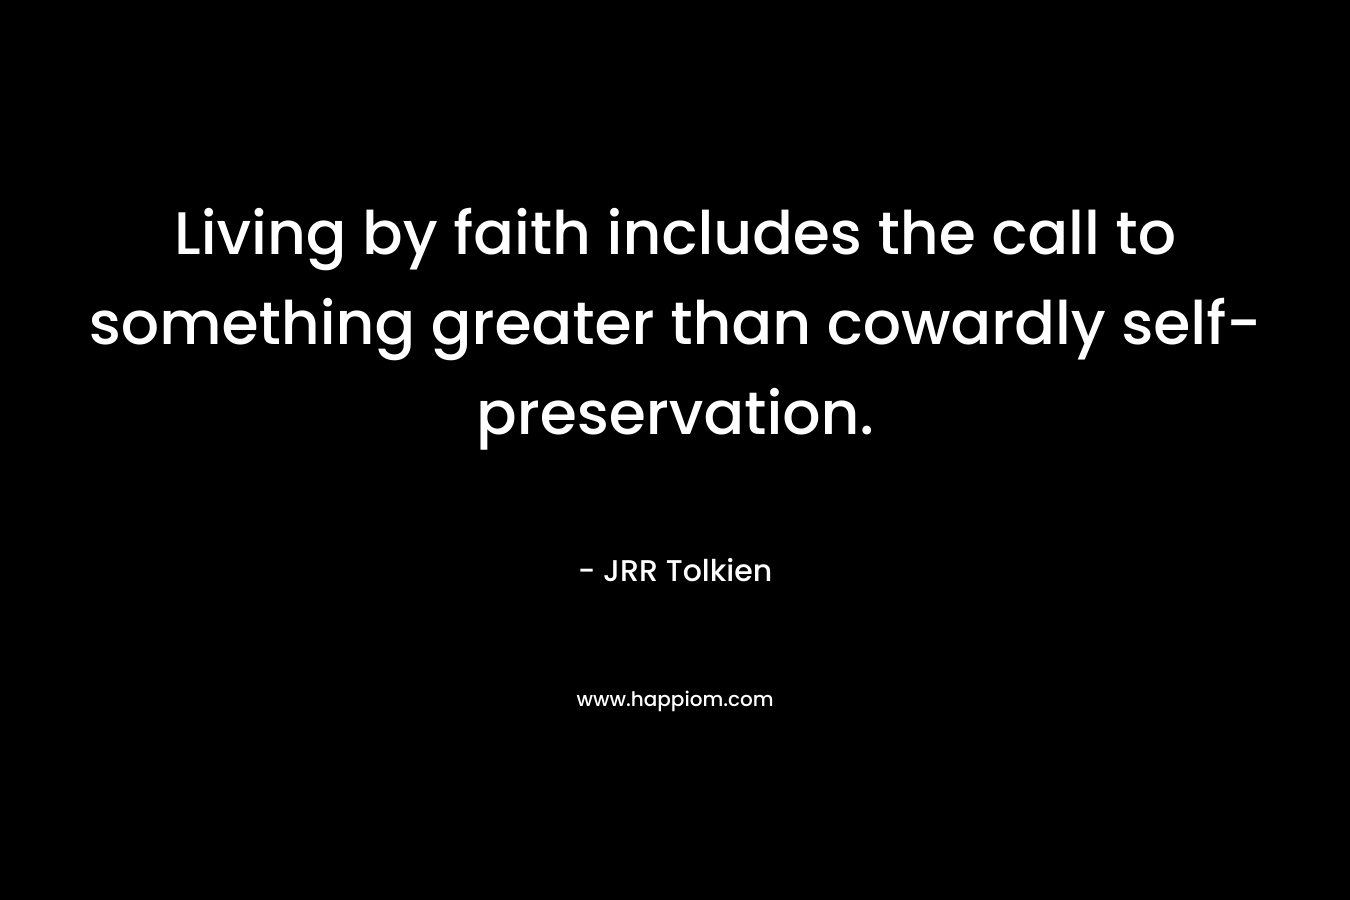 Living by faith includes the call to something greater than cowardly self-preservation. – JRR Tolkien